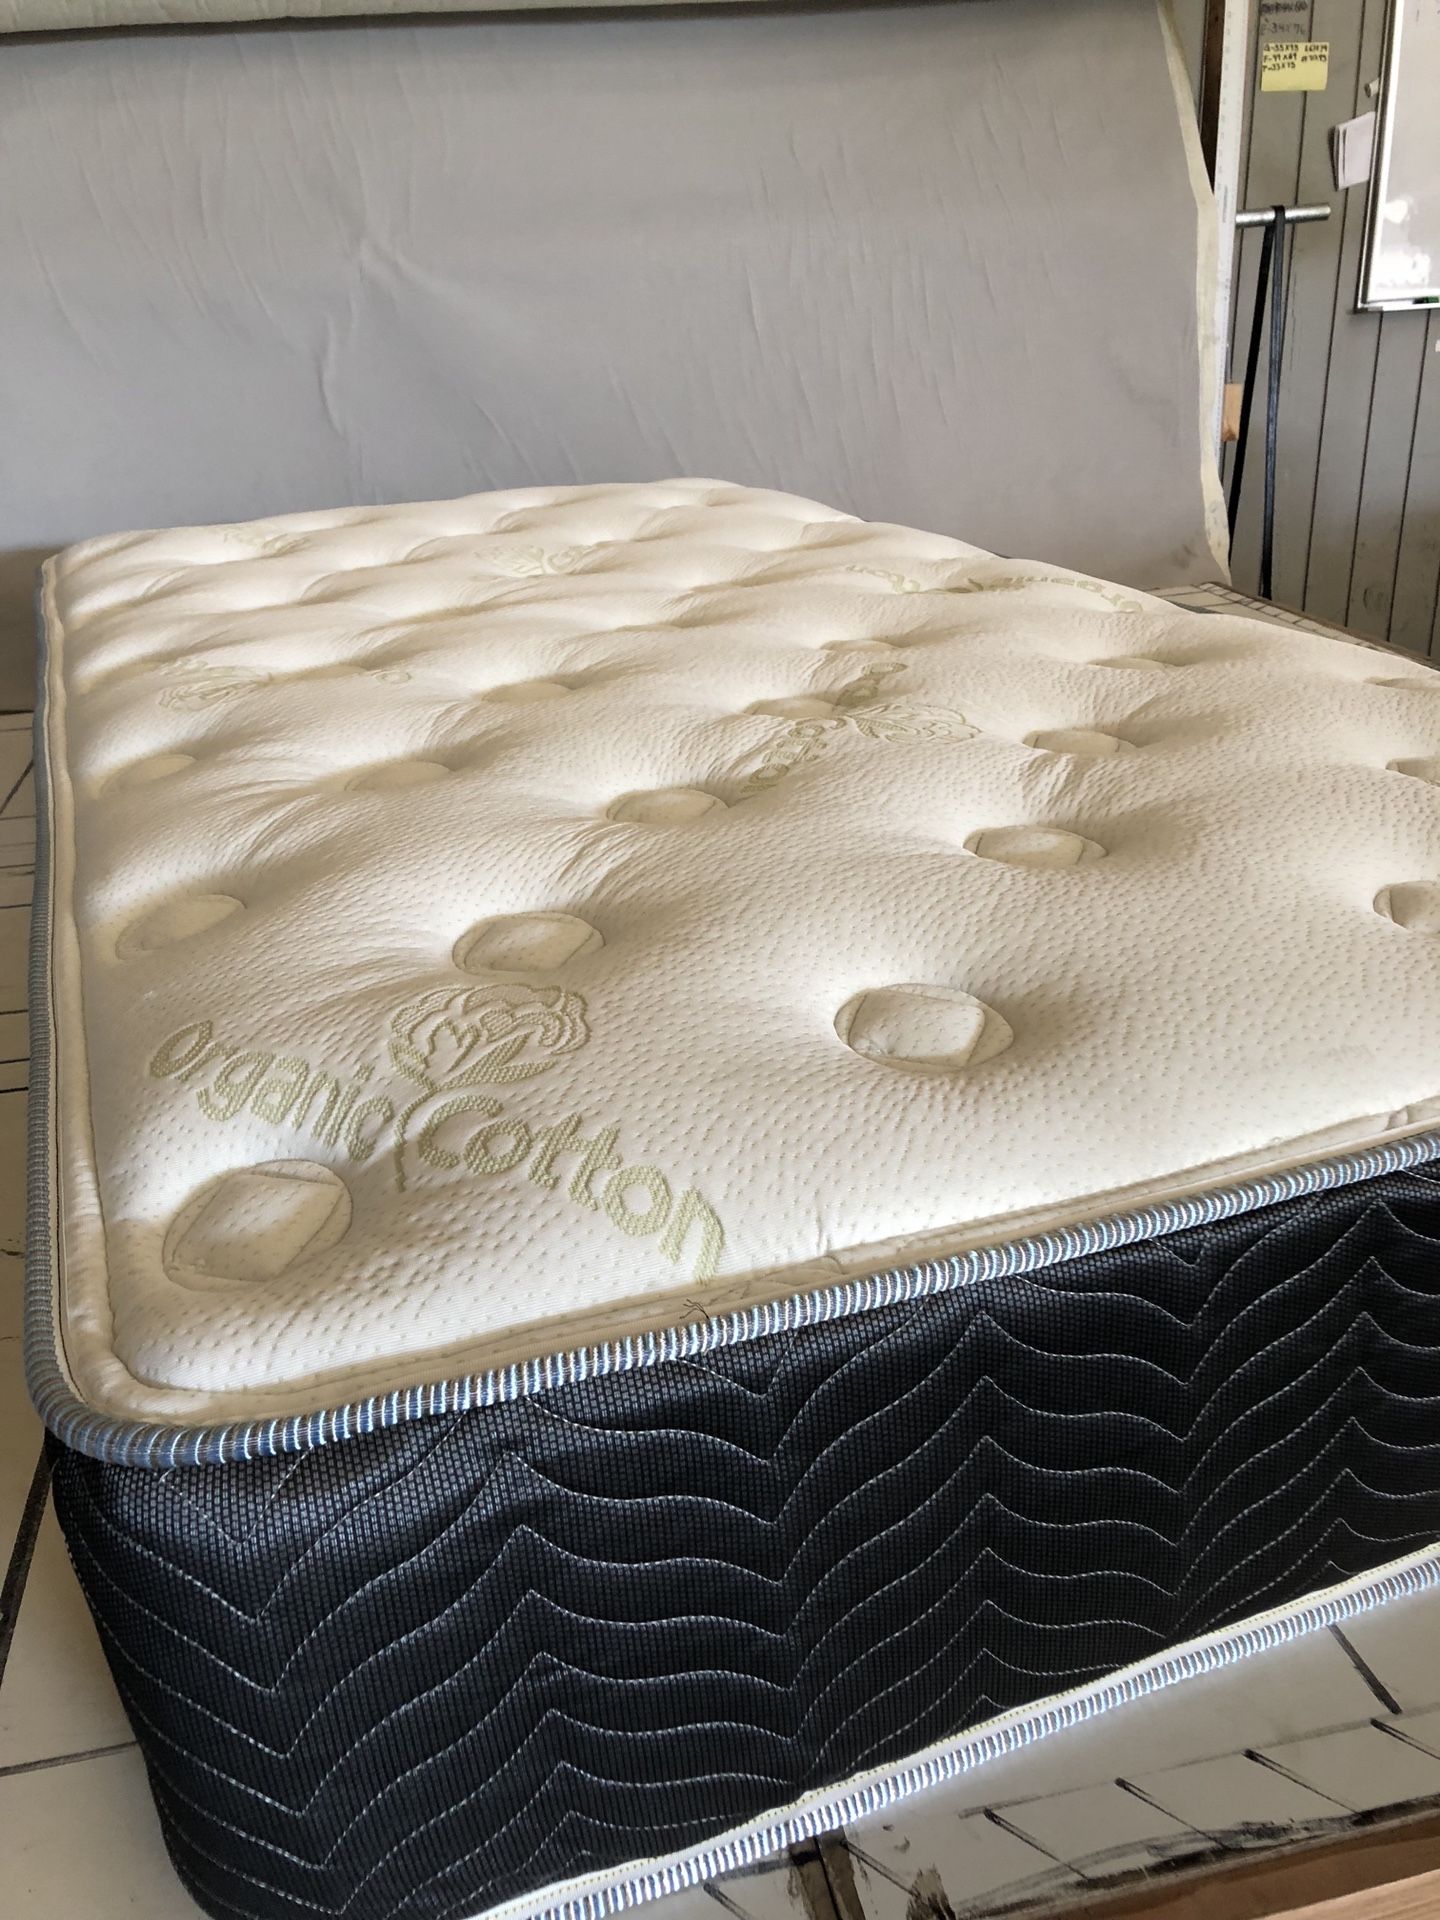 Mattress for sale brand new twin size